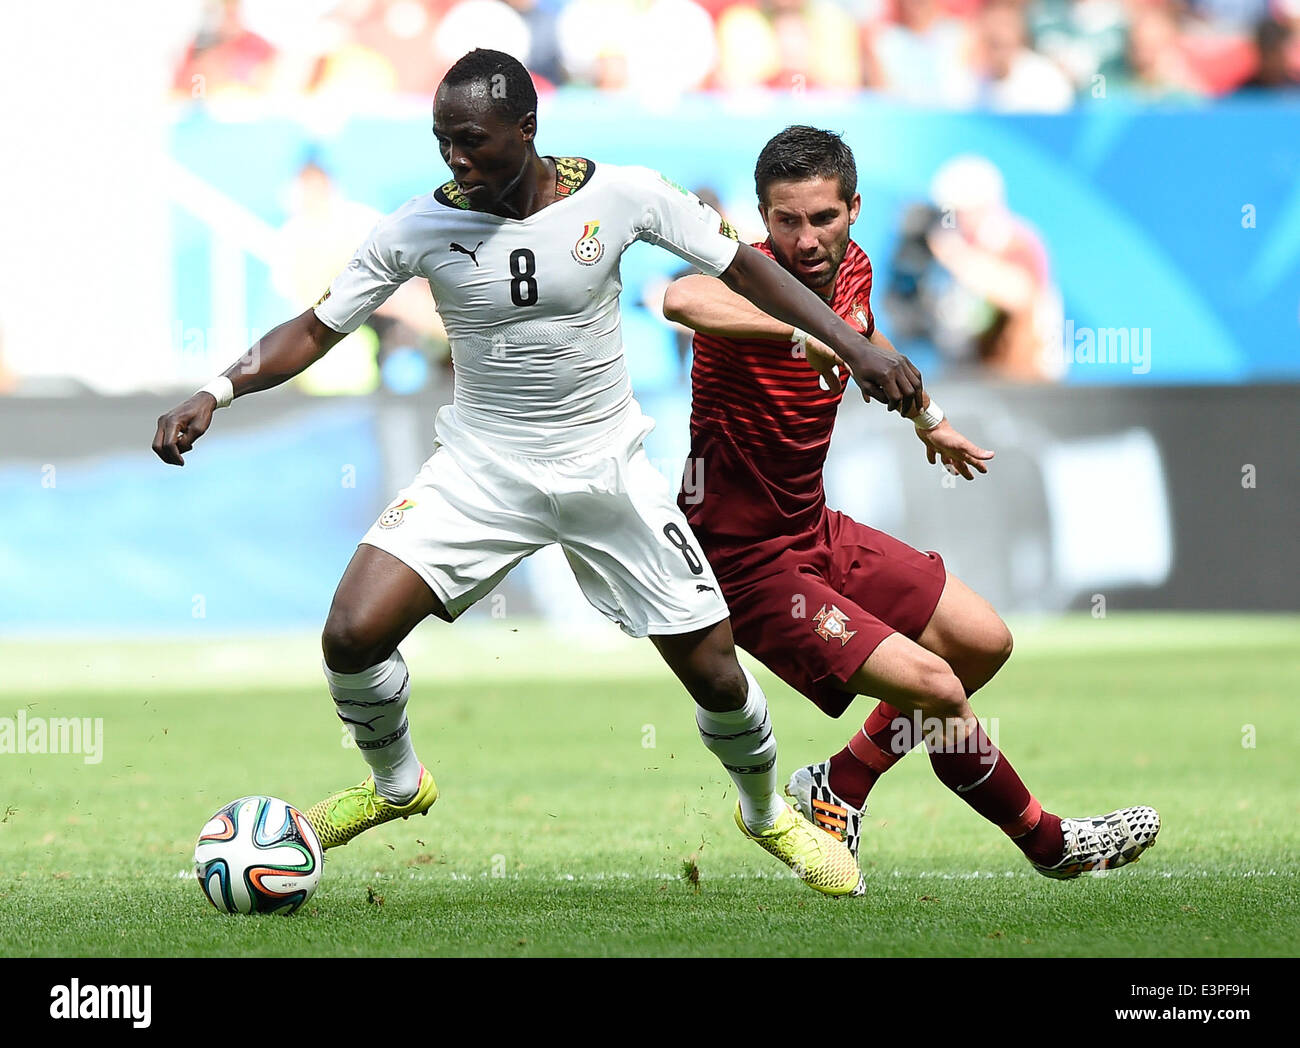 Brasilia, Brazil. 26th June, 2014. Ghana's Emmanuel Agyemang-Badu (L) vies with Portugal's Joao Moutinho during a Group G match between Portugal and Ghana of 2014 FIFA World Cup at the Estadio Nacional Stadium in Brasilia, Brazil, June 26, 2014. Portugal won 2-1 over Ghana on Thursday. © Qi Heng/Xinhua/Alamy Live News Stock Photo